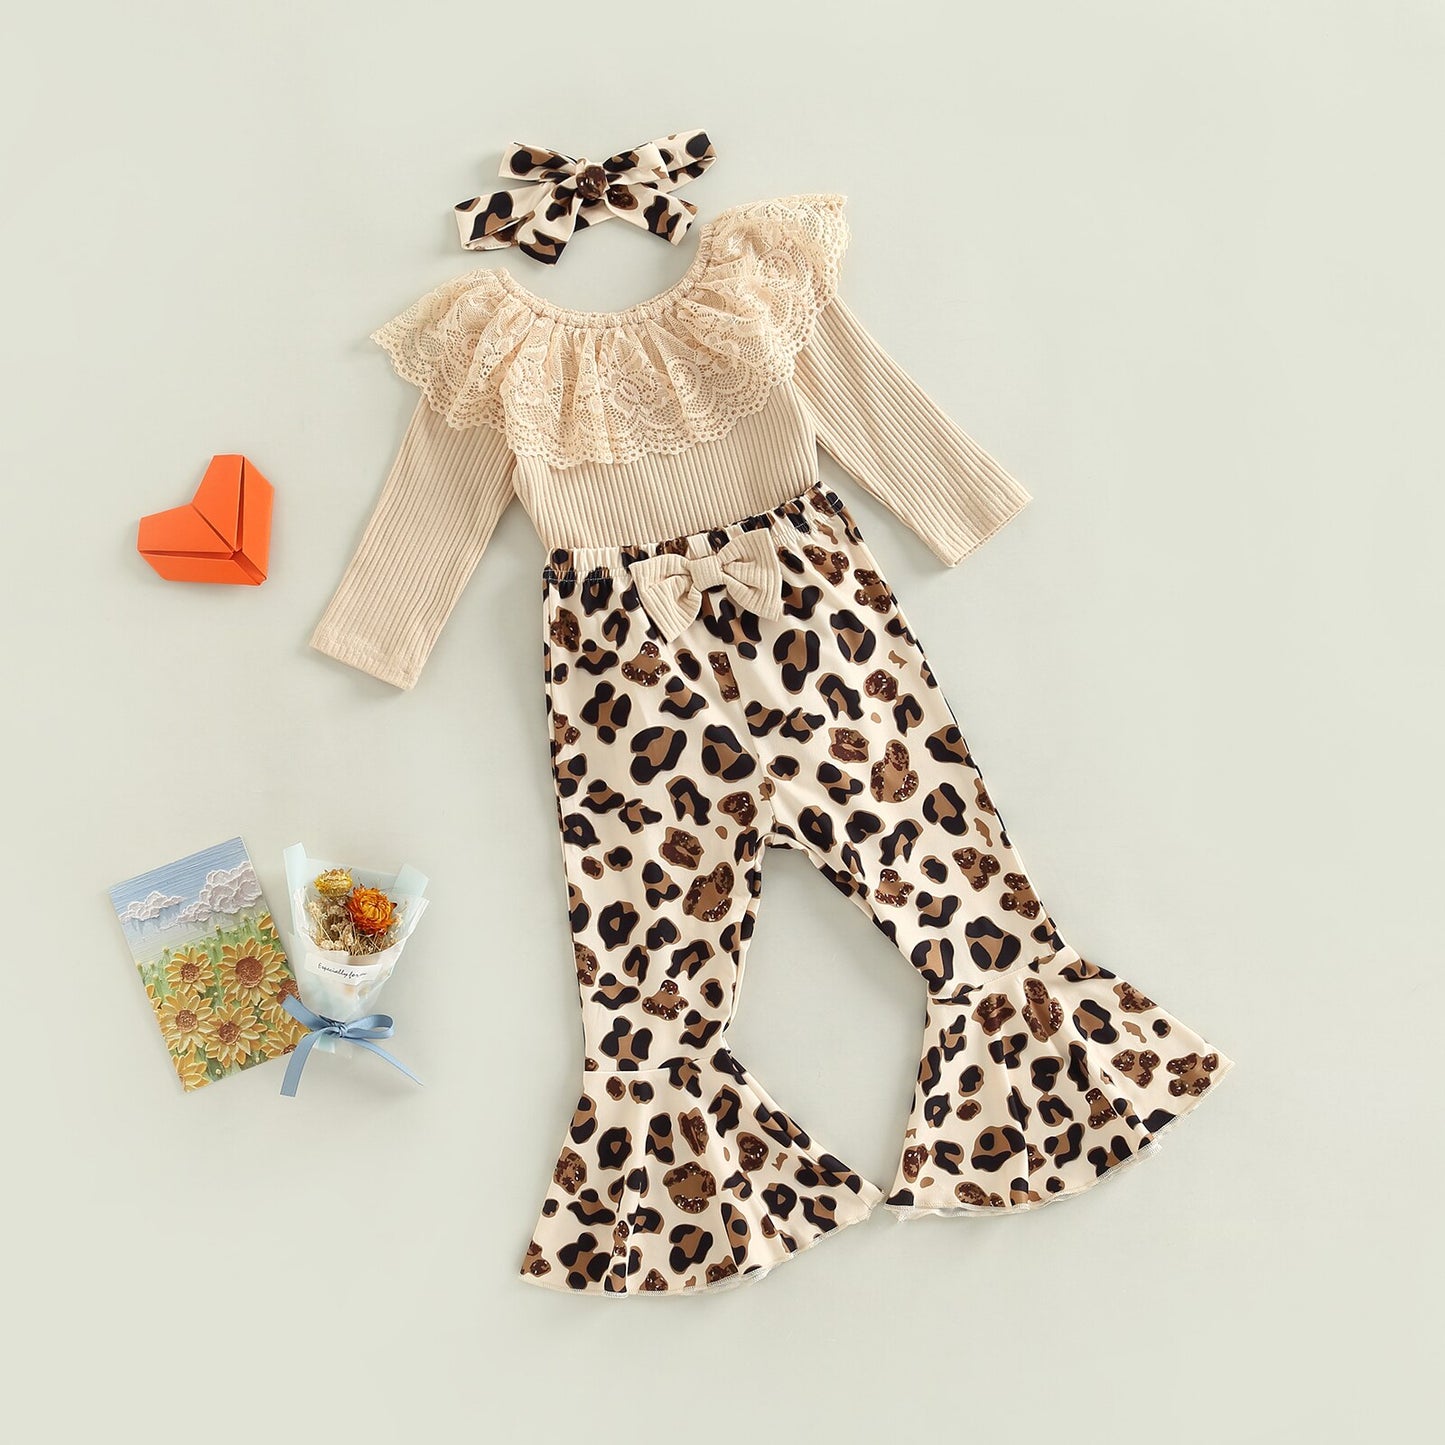 Infant Newborn Baby Girls 3 Pieces Outfit, Lace Ruffles Knitted Ribbed Romper + Leopard/Floral Print Flare Pants + Headband Set